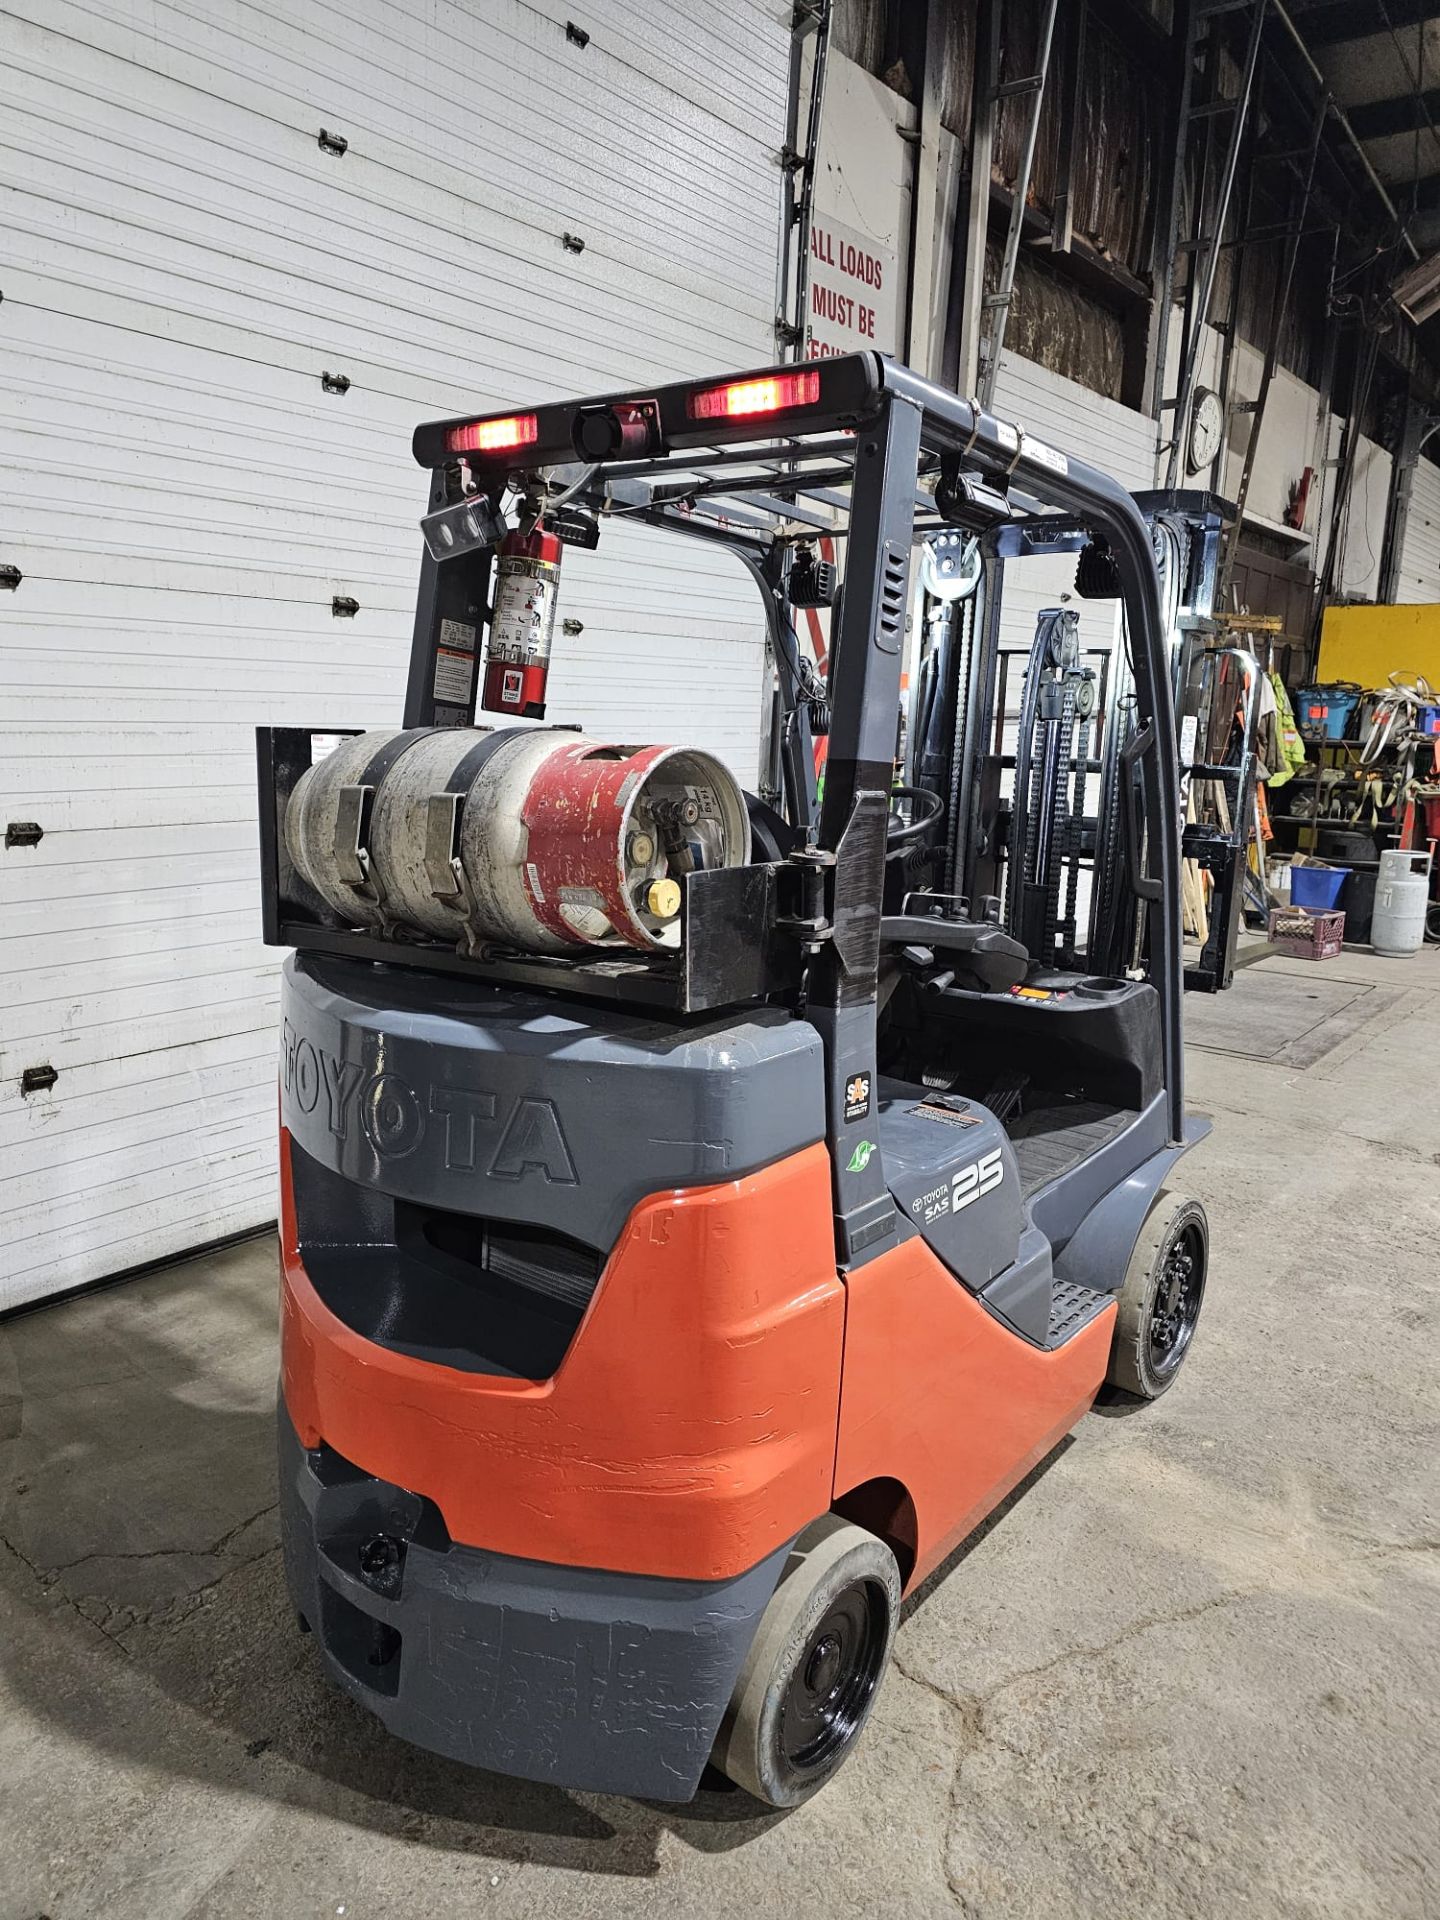 2020 Toyota 5,000lbs Capacity LPG (Propane) Forklift sideshift 3-STAGE MAST 189" load height with - Image 4 of 6